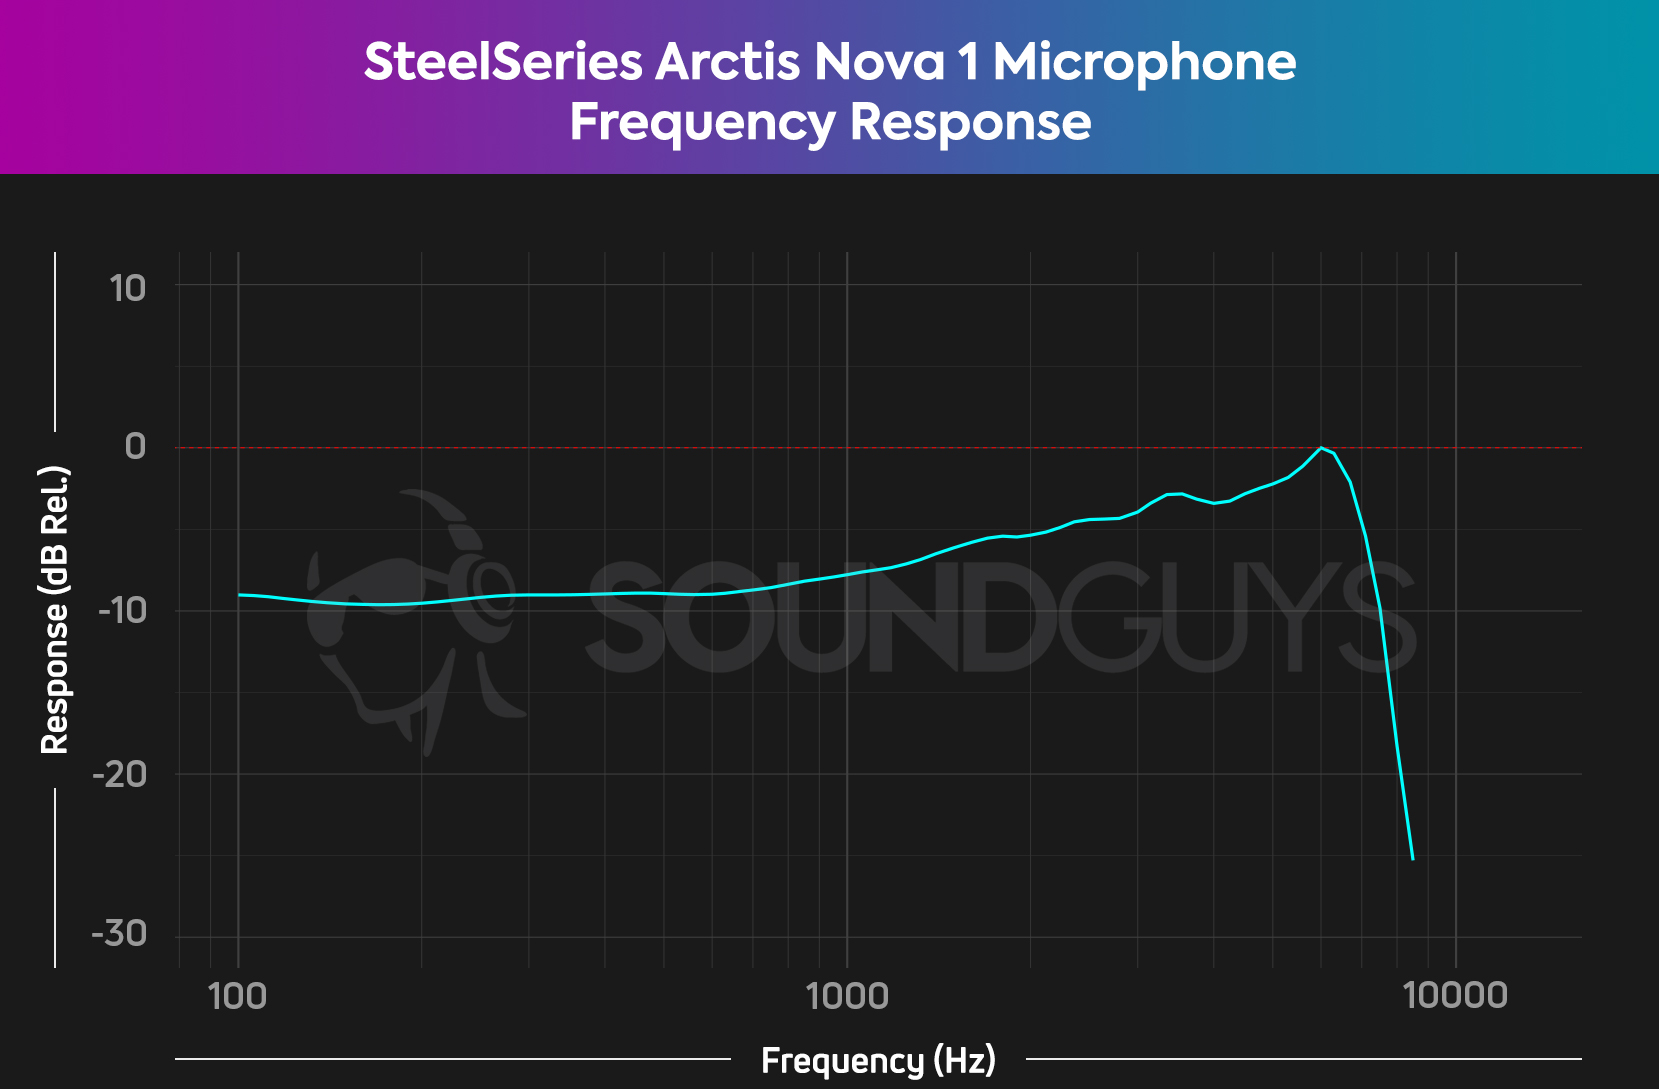 The SteelSeries Arctis Nova 1 microphone frequency response graph showing a fairly flat response with a peak and drop off at 8Khz.